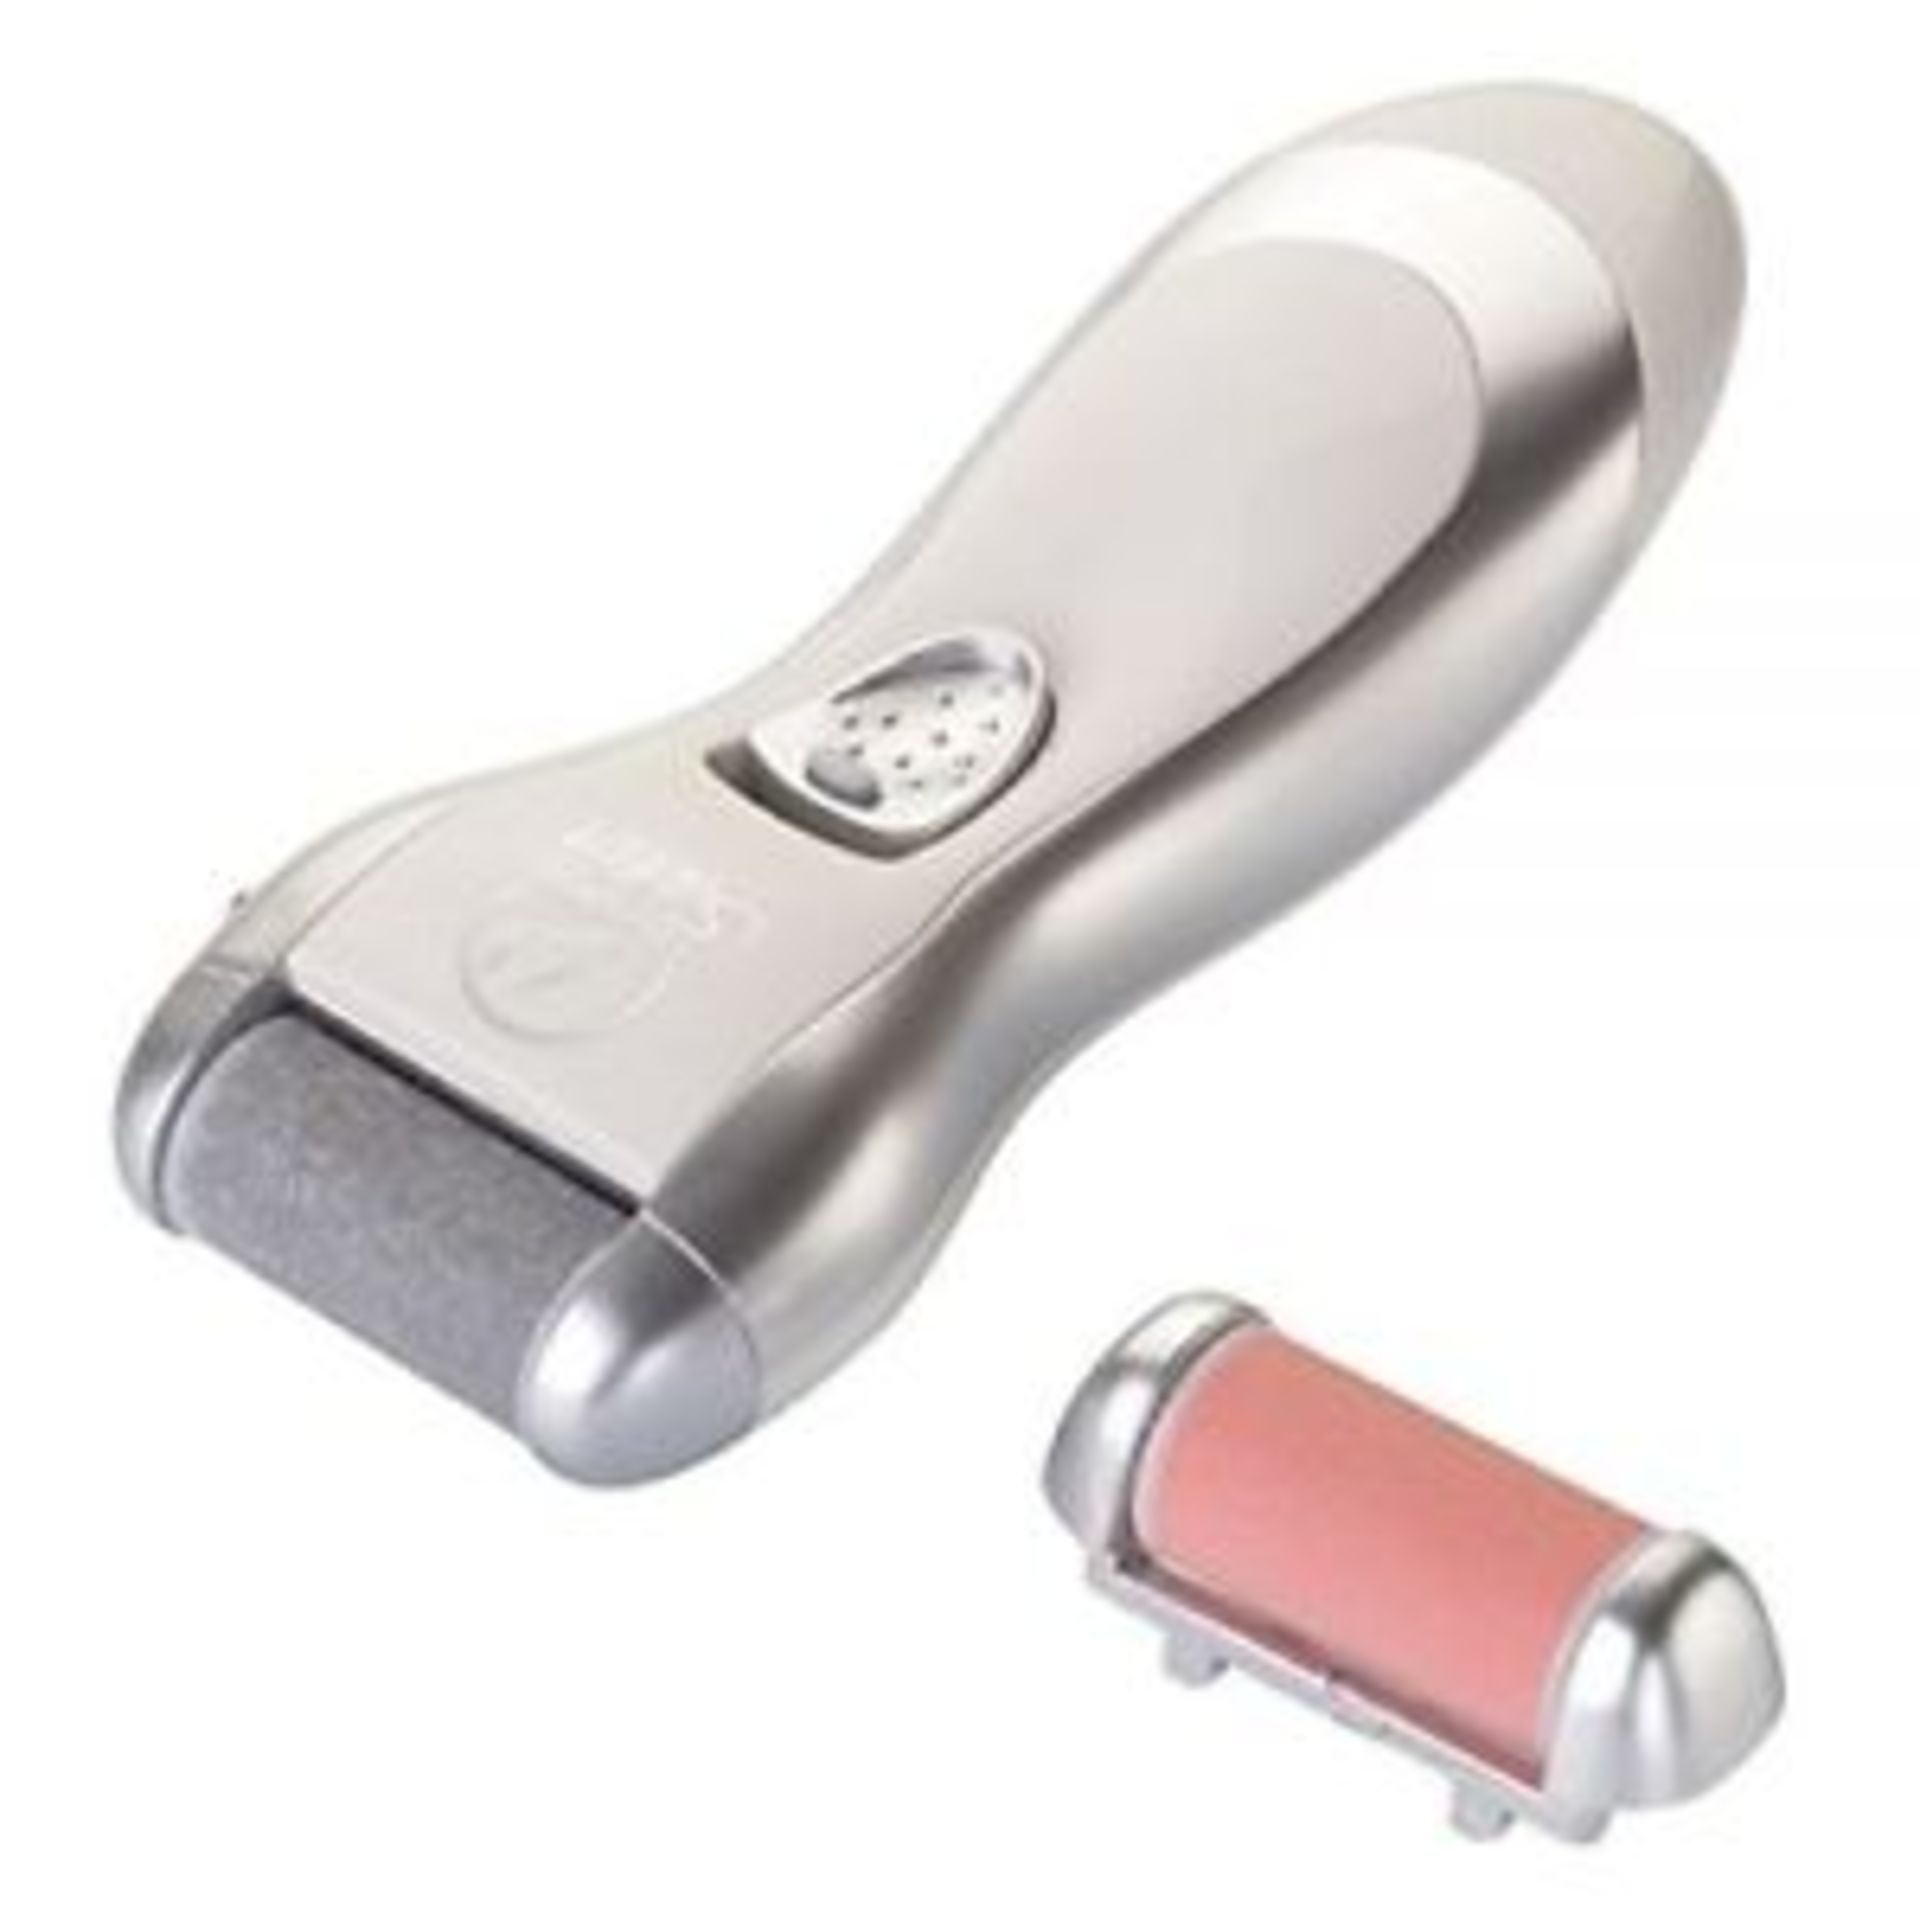 V Brand New Velform Satin Battery Operated Foot File Callous/Rough Skin Remover-Rotates At 2500rpm- - Image 3 of 3